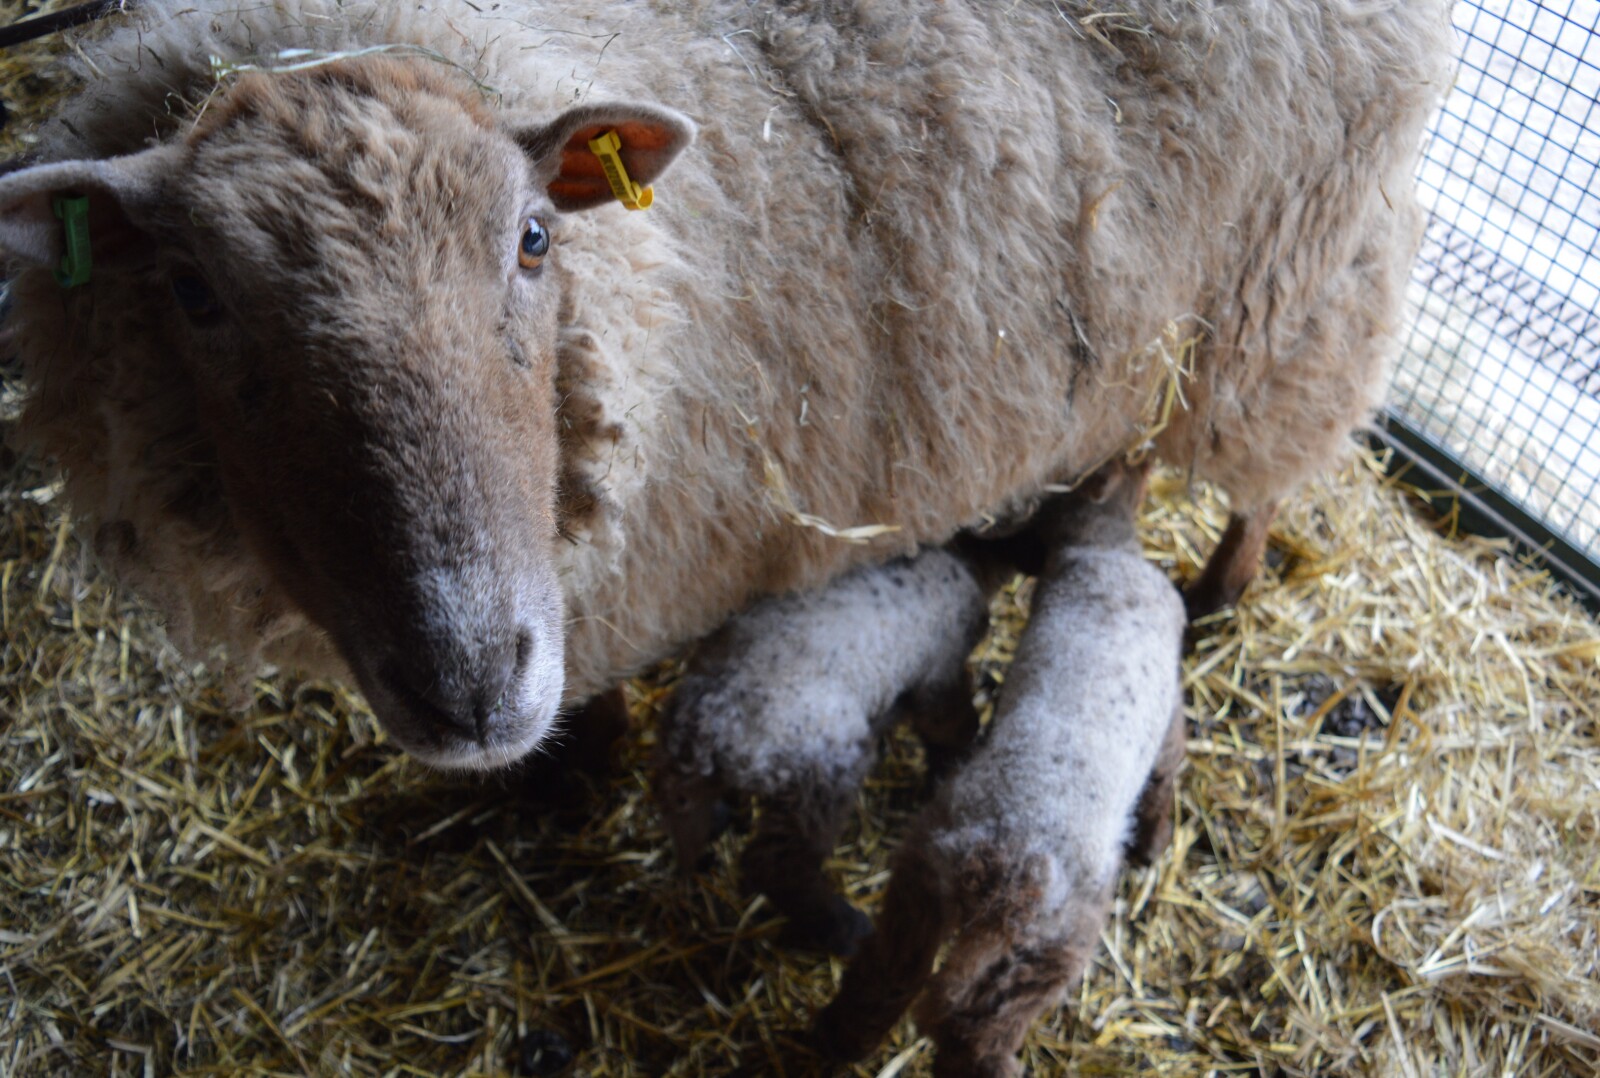 A picture of a ewe with twin lambs